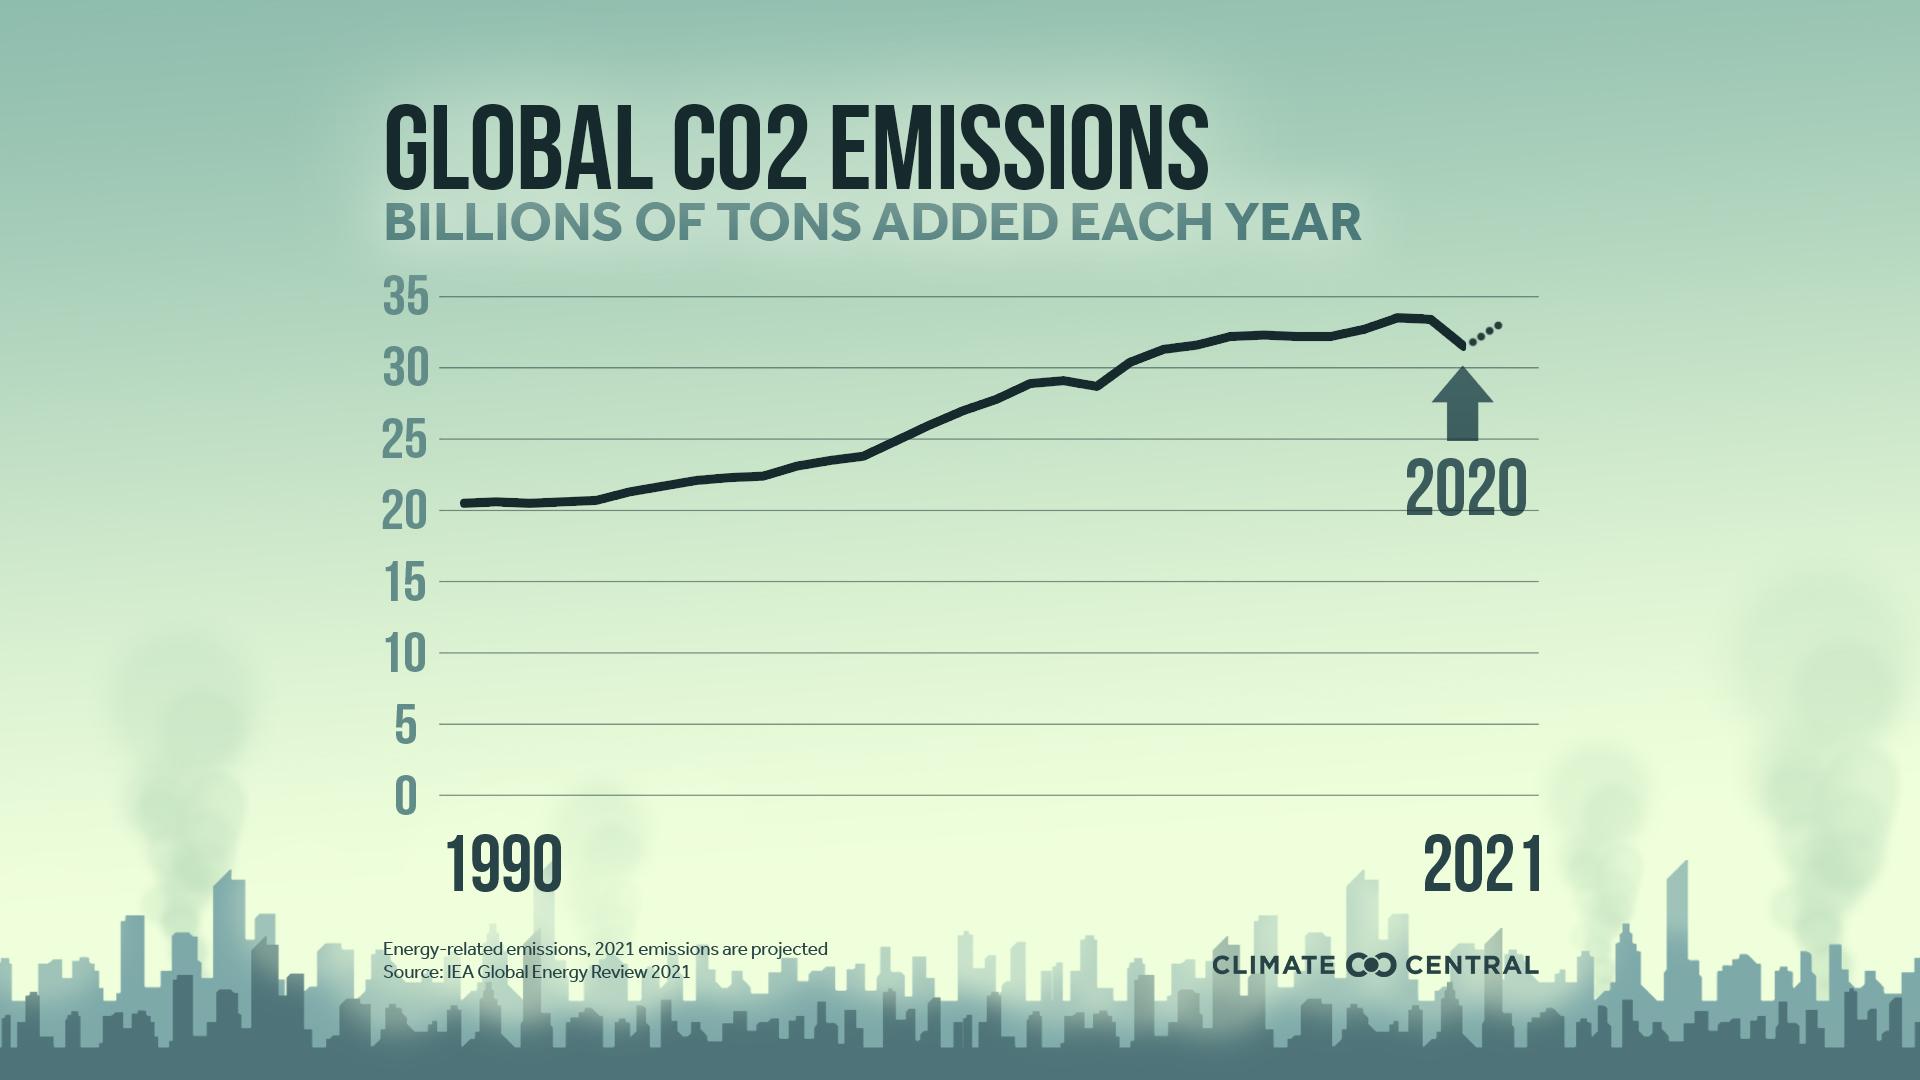 CO2 Emissions - Covid-19 and Climate Change